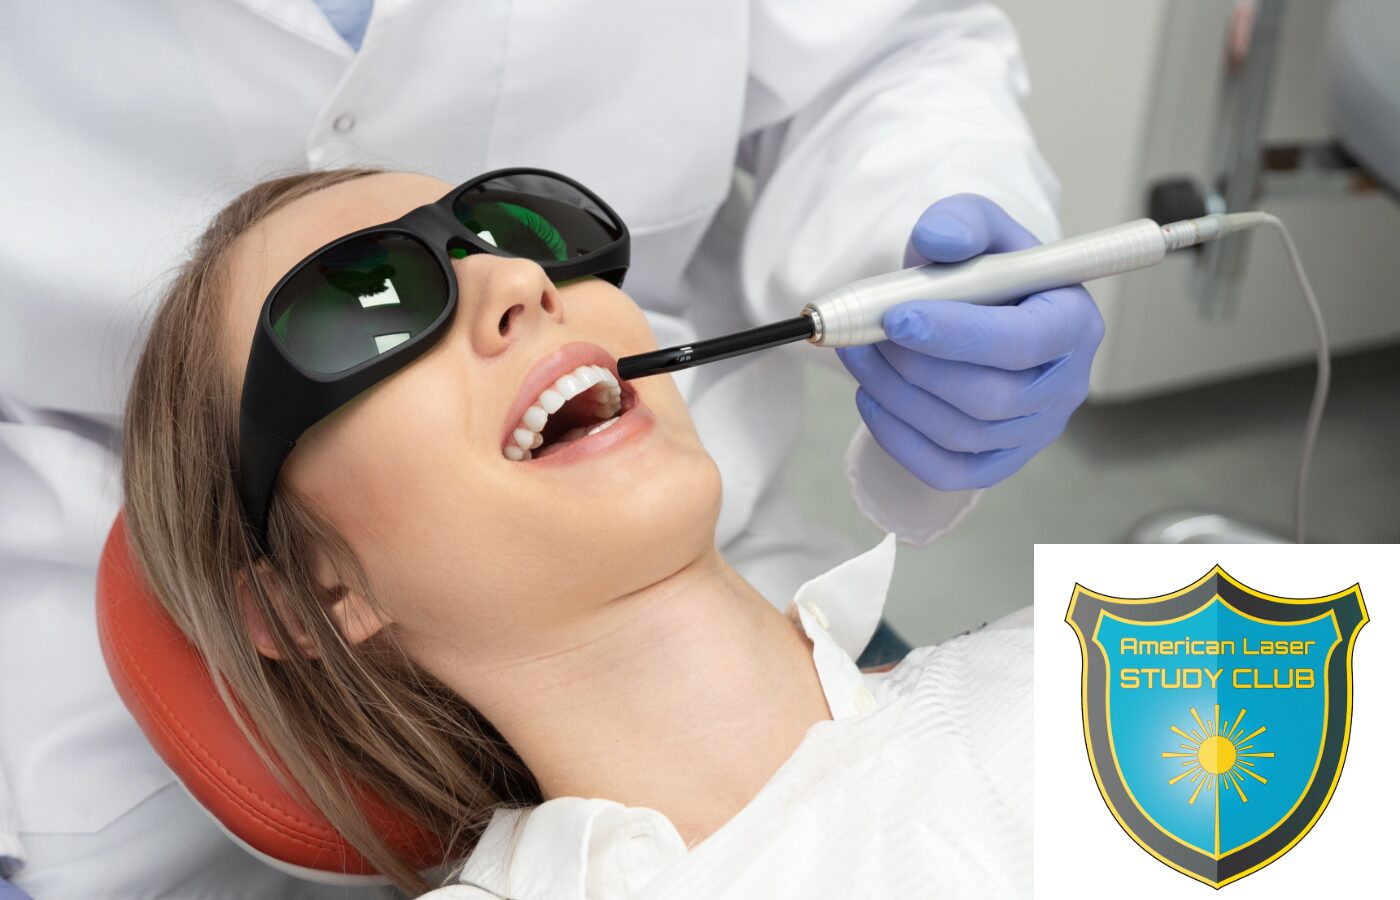 Dental Laser treatment in a woman with dark glasses on. The American Laser Study CLub logo is in the bottom right corner.